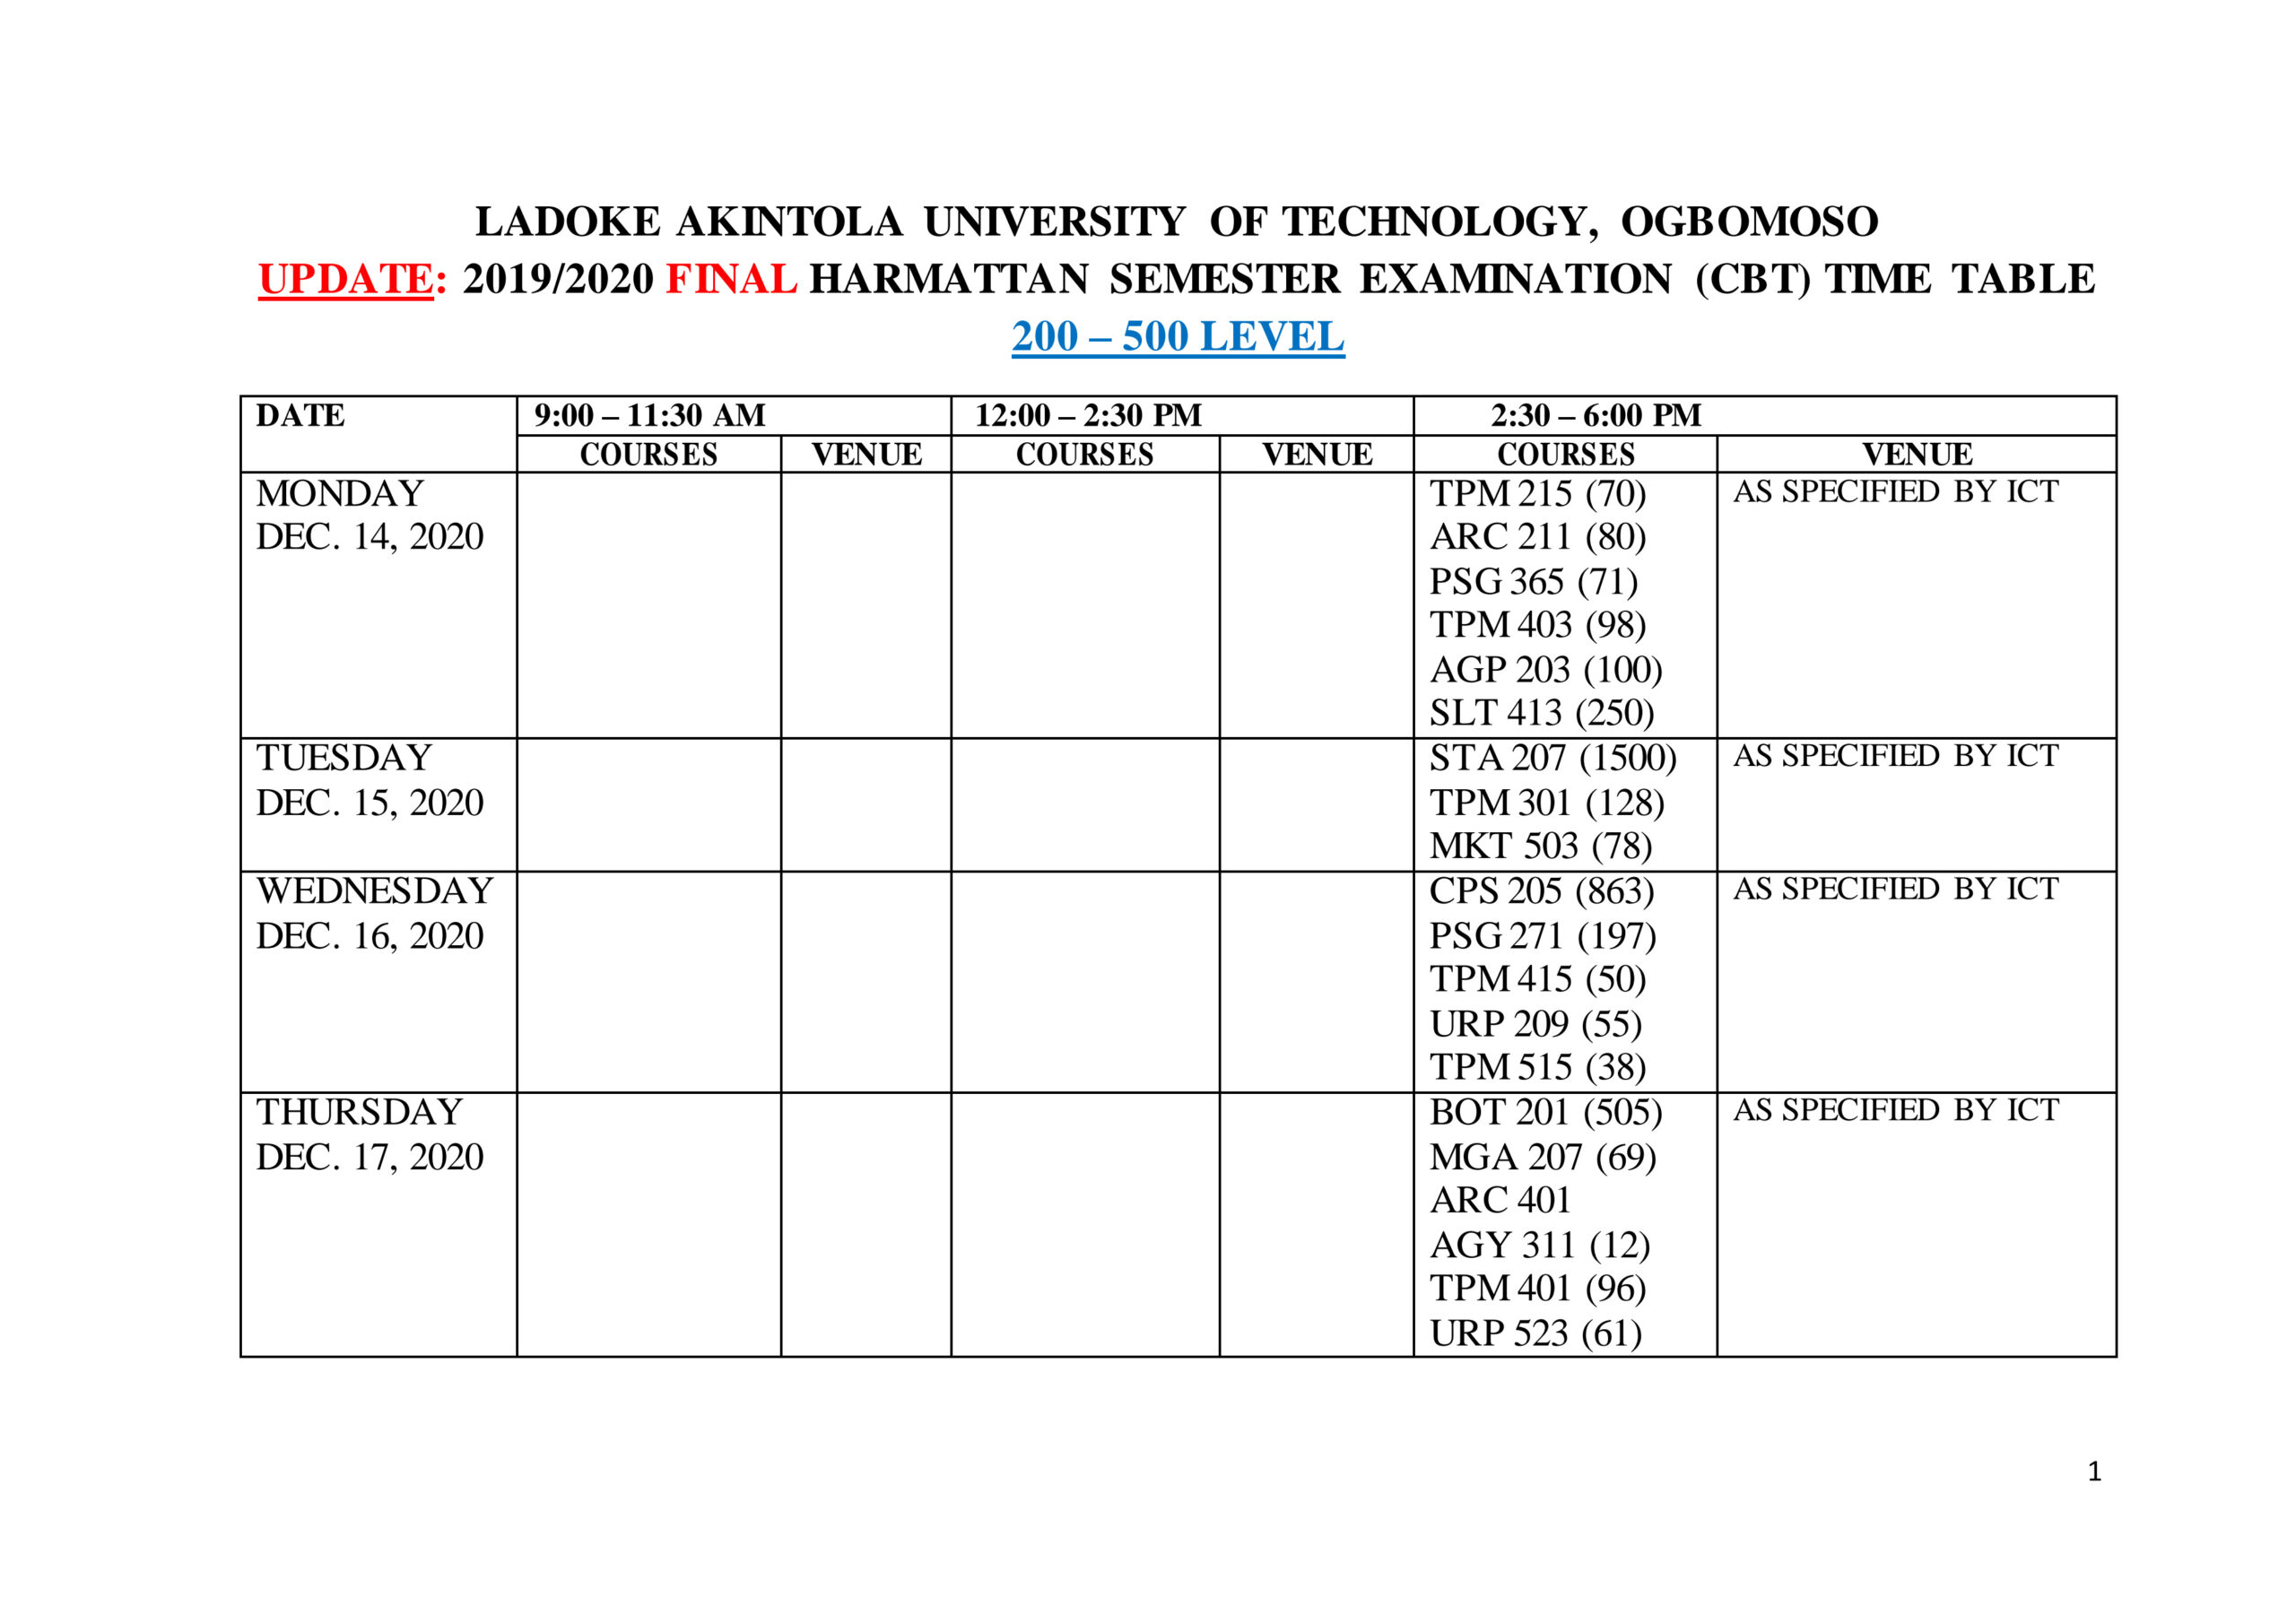 LAUTECH Exam Timetable for Harmattan Semester 2019/2020 is out